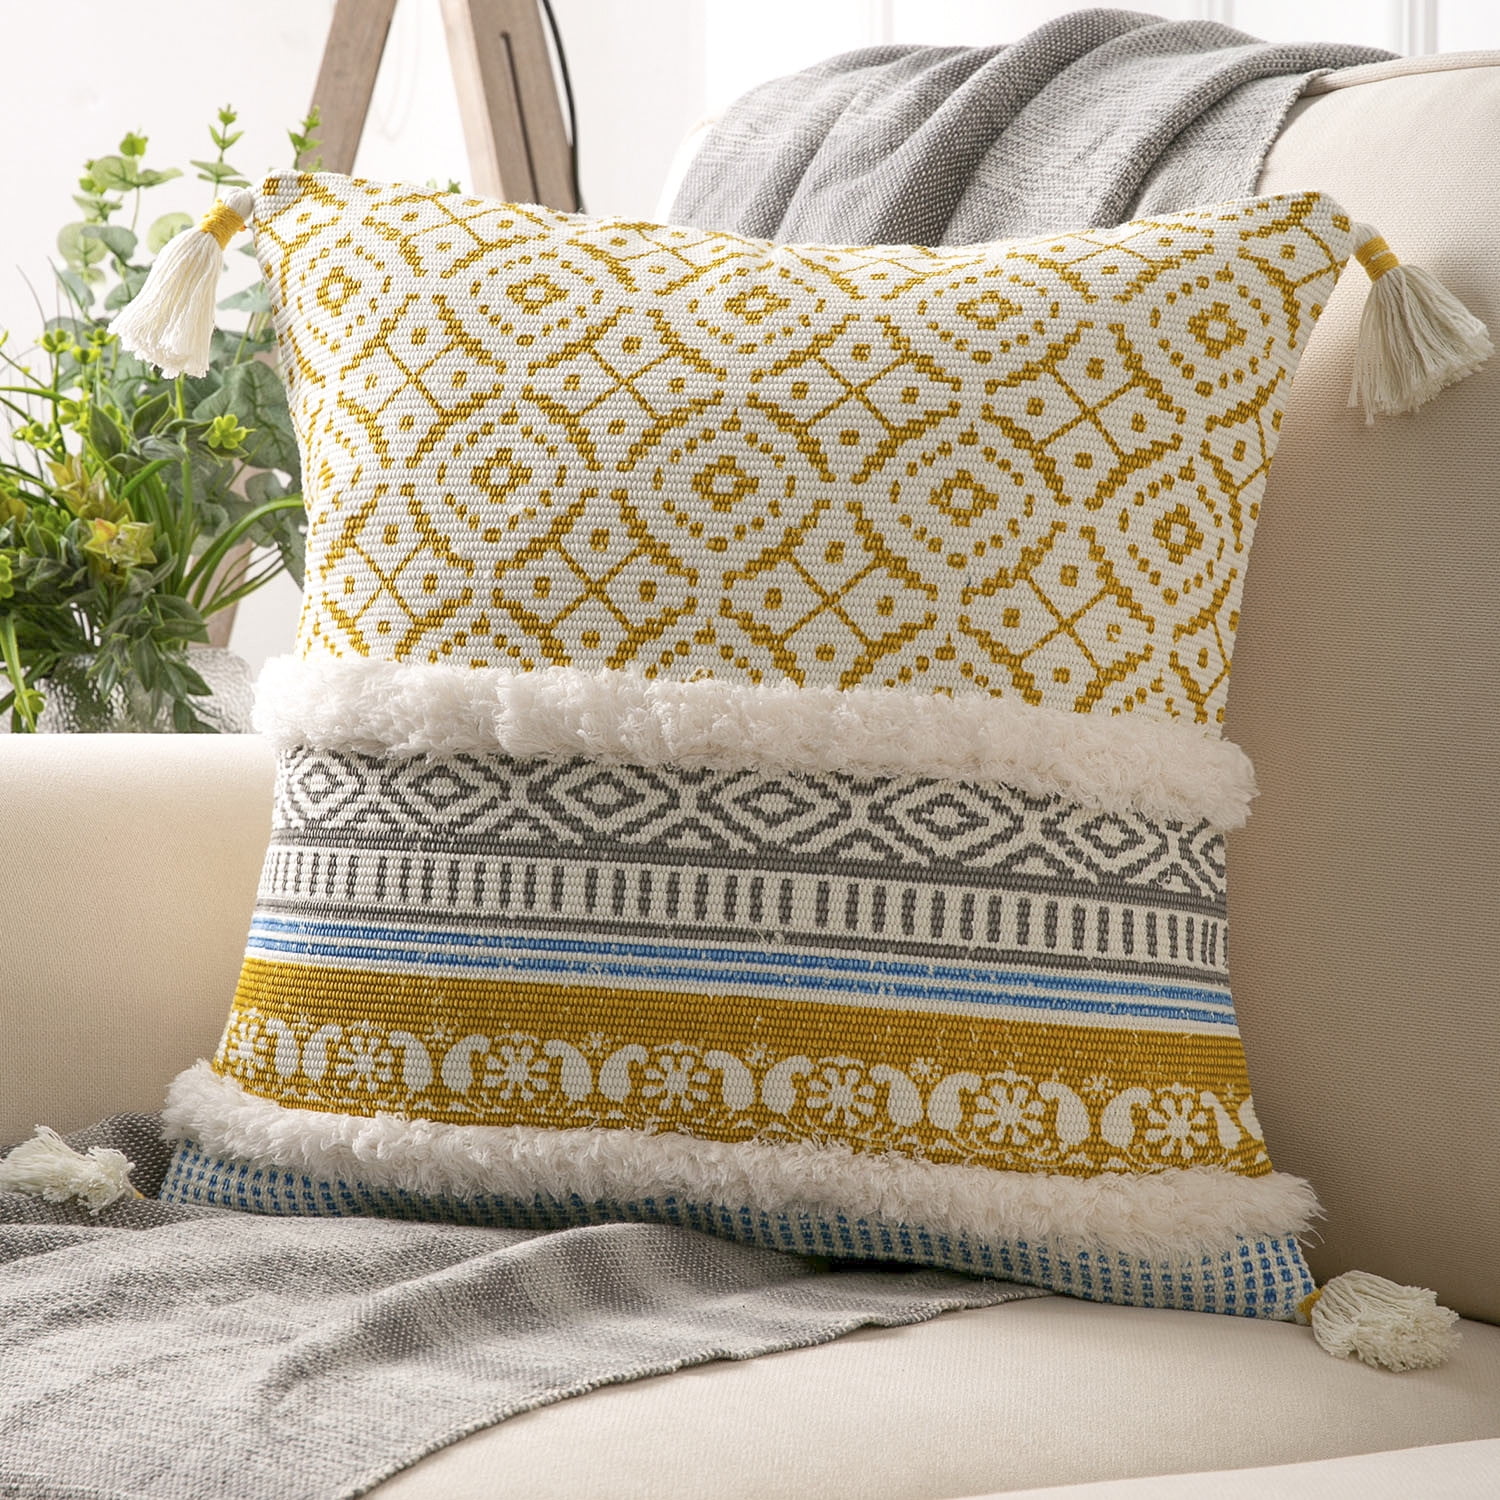 Phantoscope Printed Boho Woven Tufted with Tassel Series Decorative Throw Pillow Cover, 18 inch x 18 inch, Yellow, 1 Pack